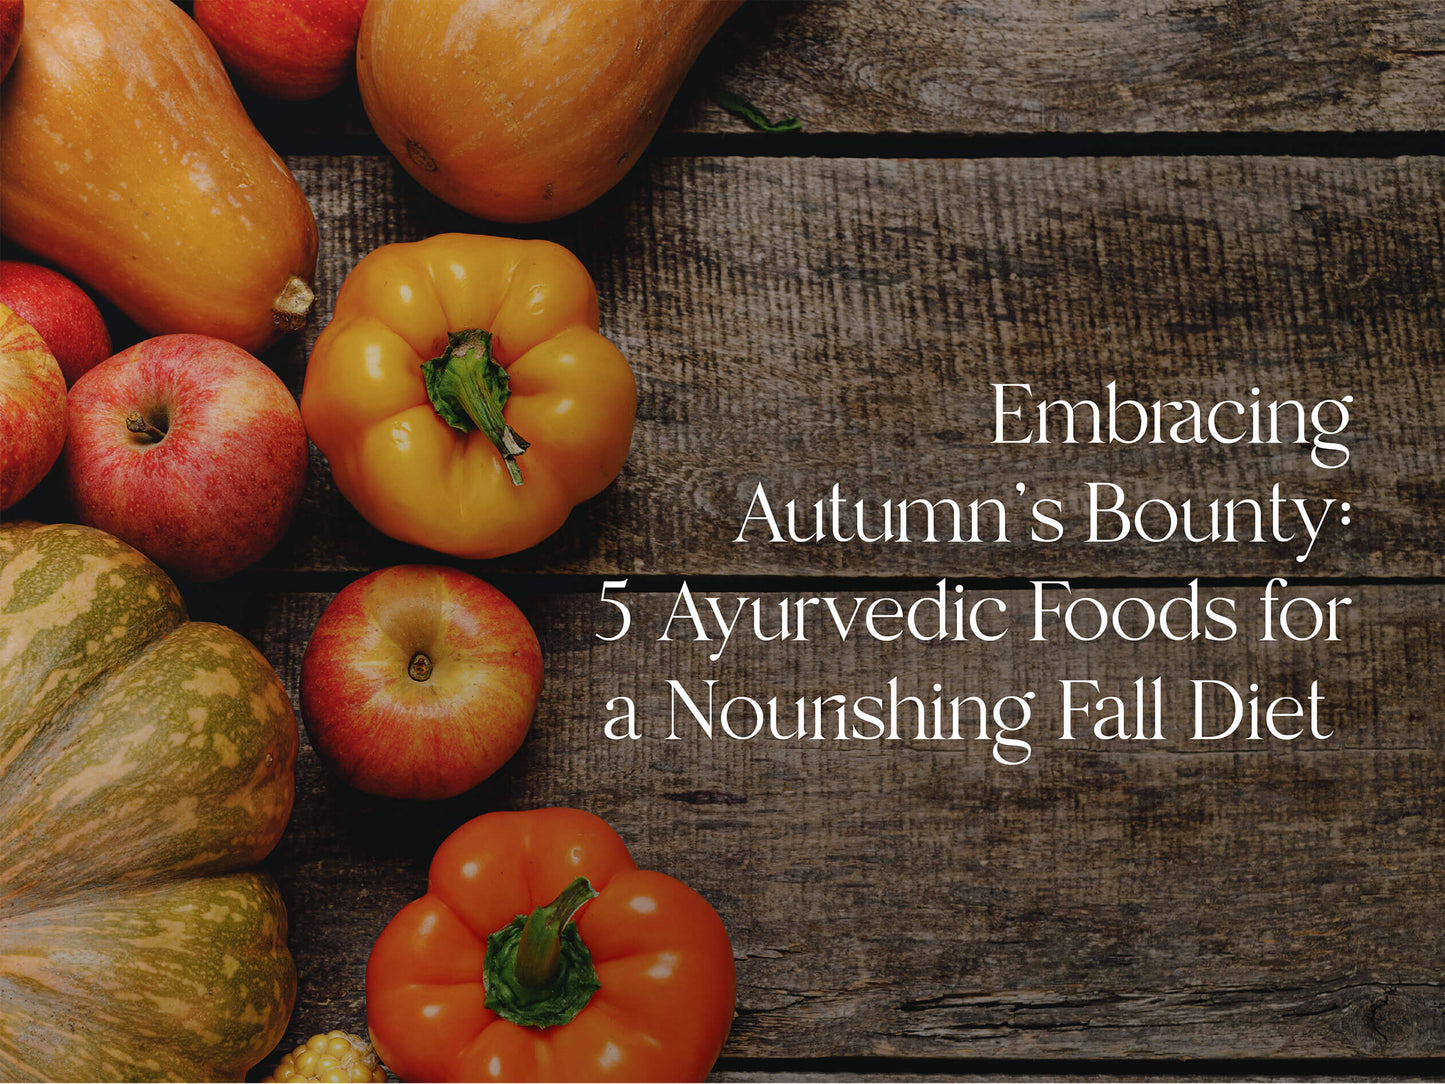 Embracing Autumn's Bounty: 5 Ayurvedic Foods for a Nourishing Fall Diet